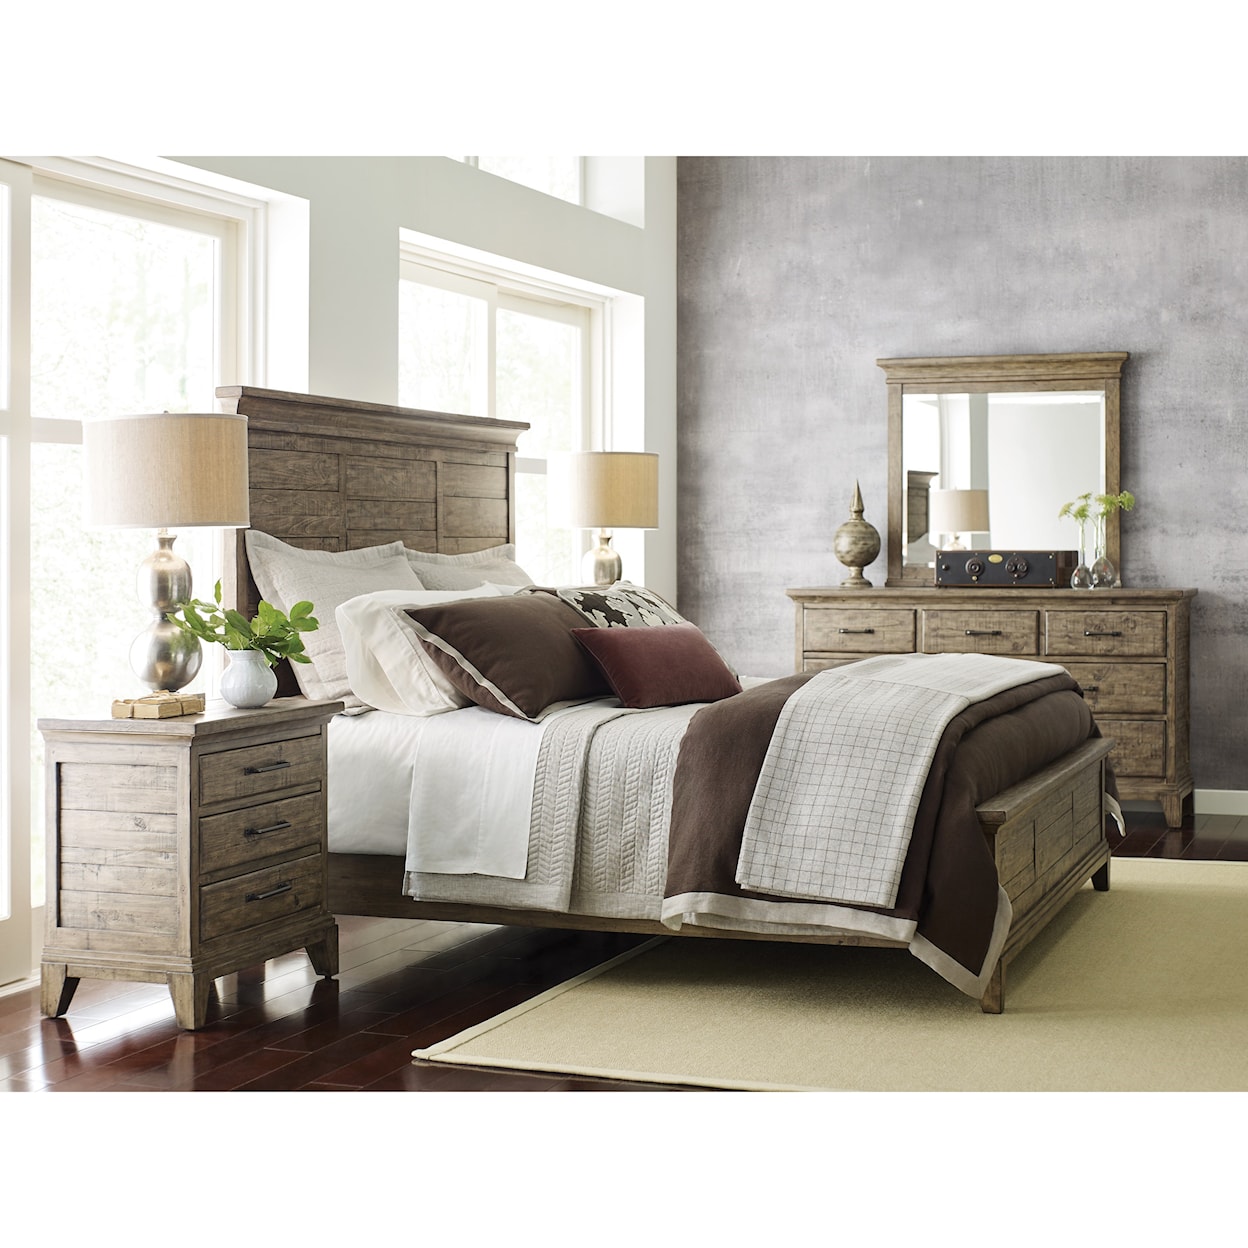 Kincaid Furniture Plank Road Jessup Panel King Bed       